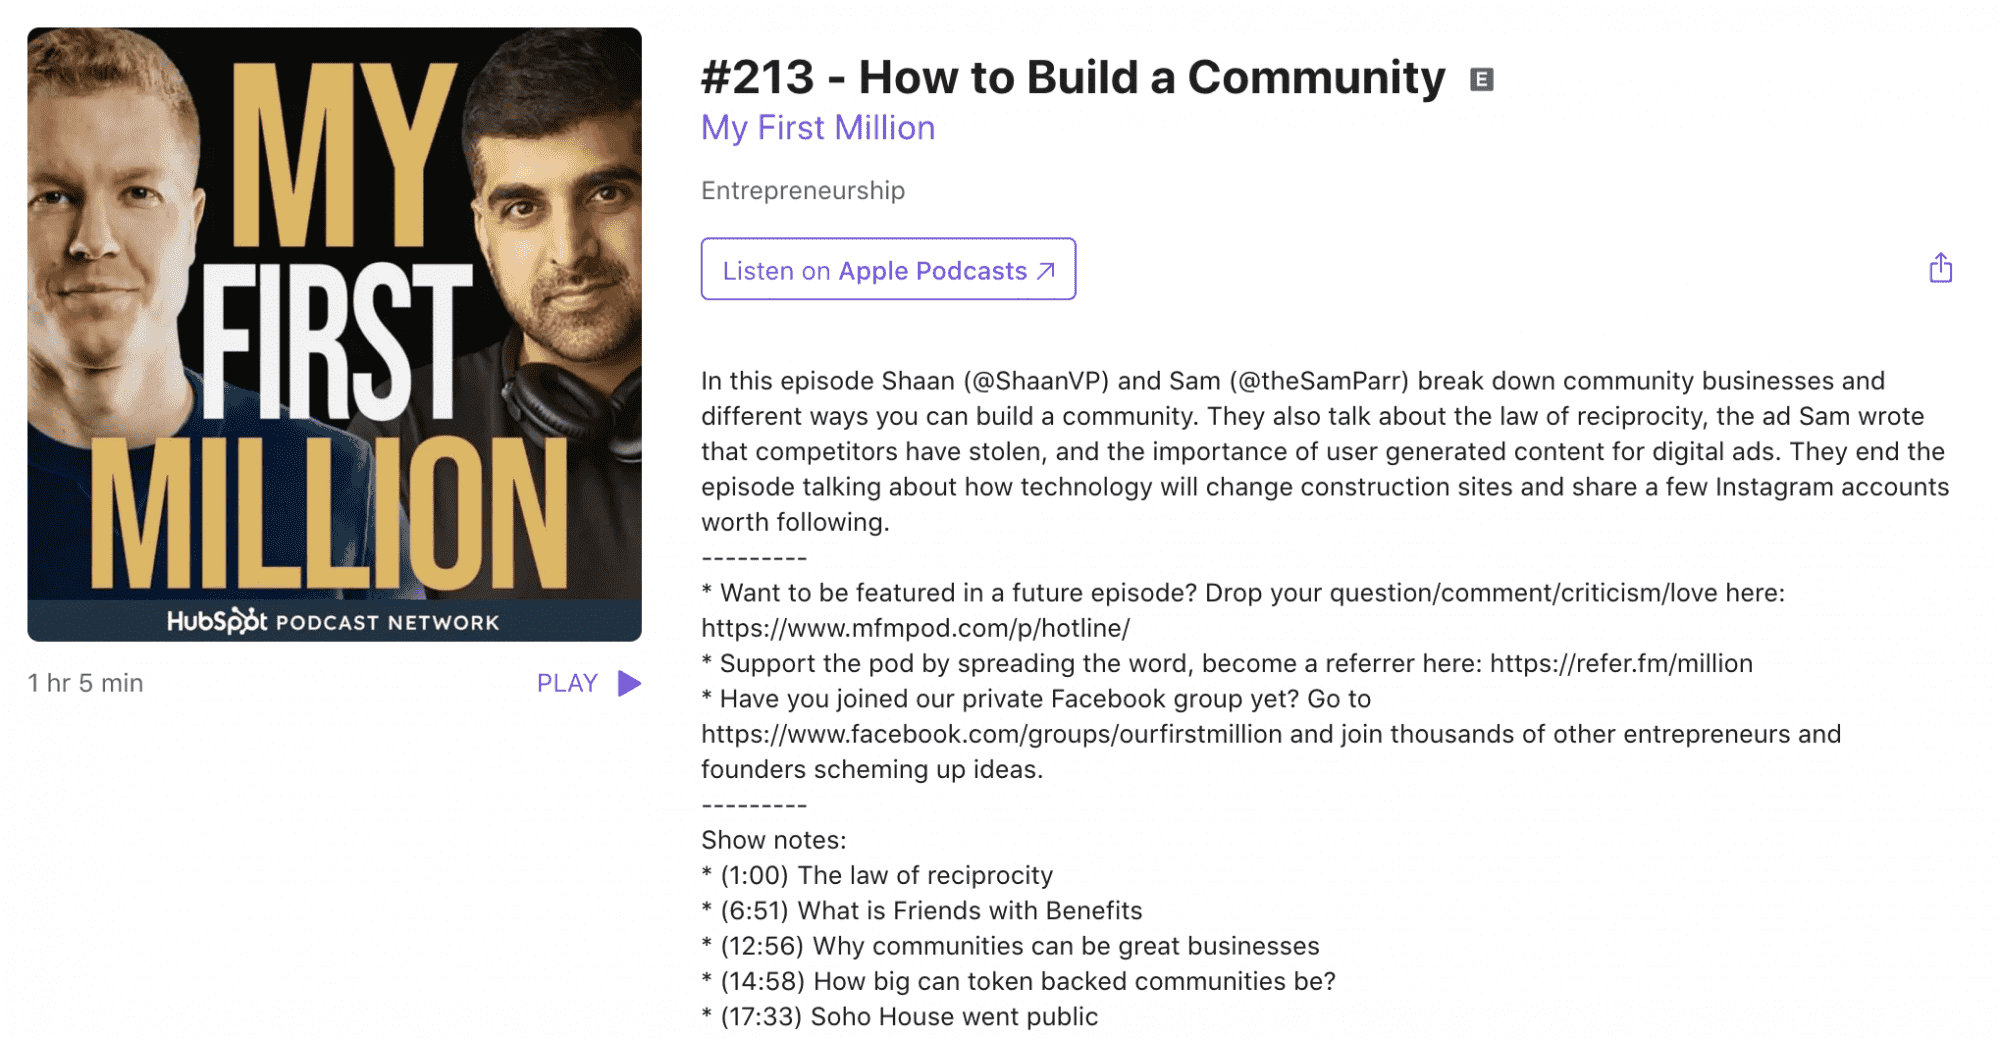 How to Build a Community